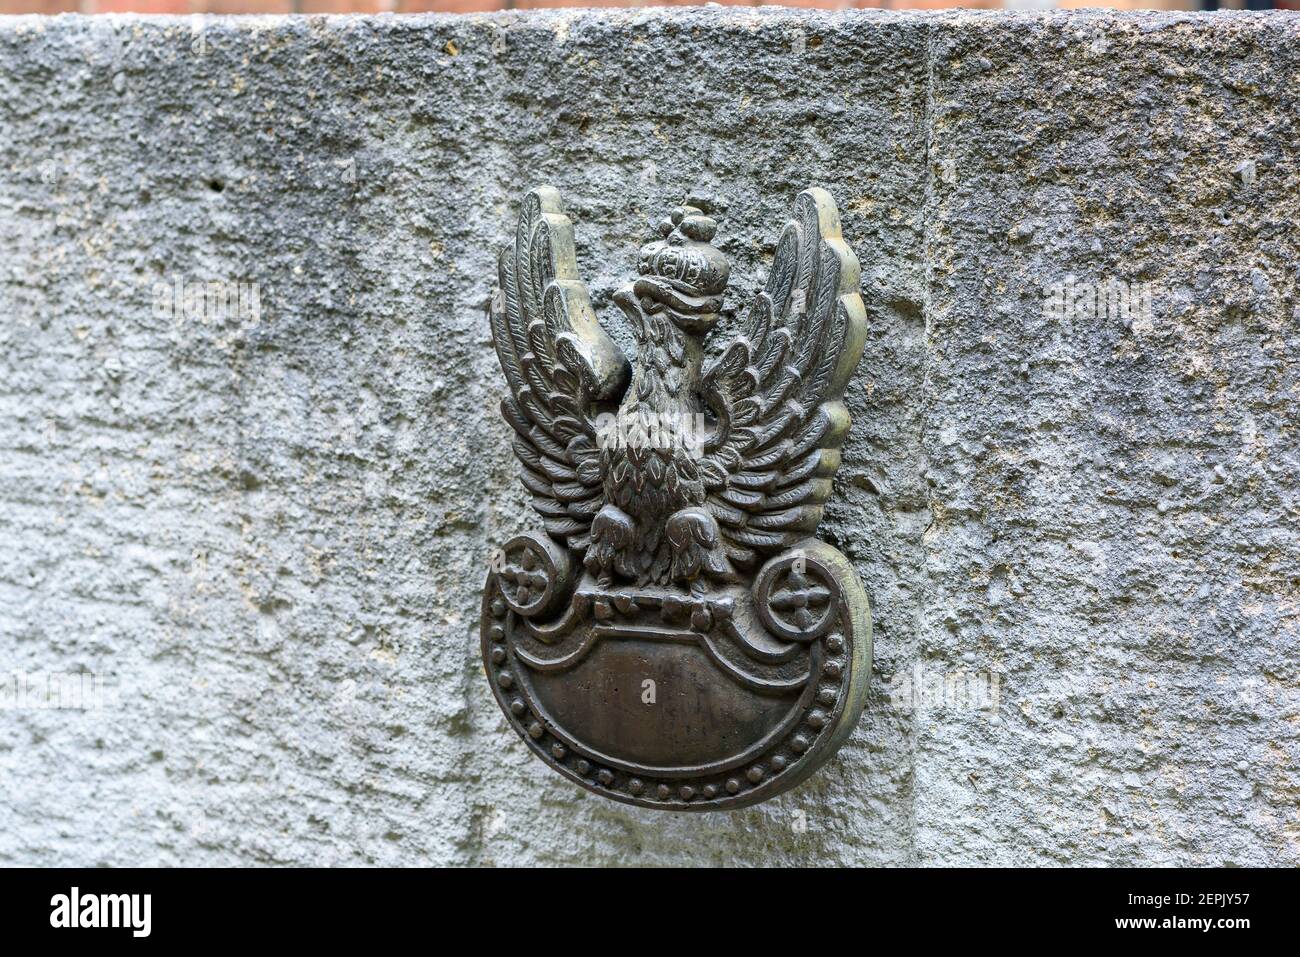 Poznan, wielkopolskie/Poland: 06.07.2019: a close-up of a symbol of the eagle in a crown on the wall in the Cytadela Park, Poznan Stock Photo